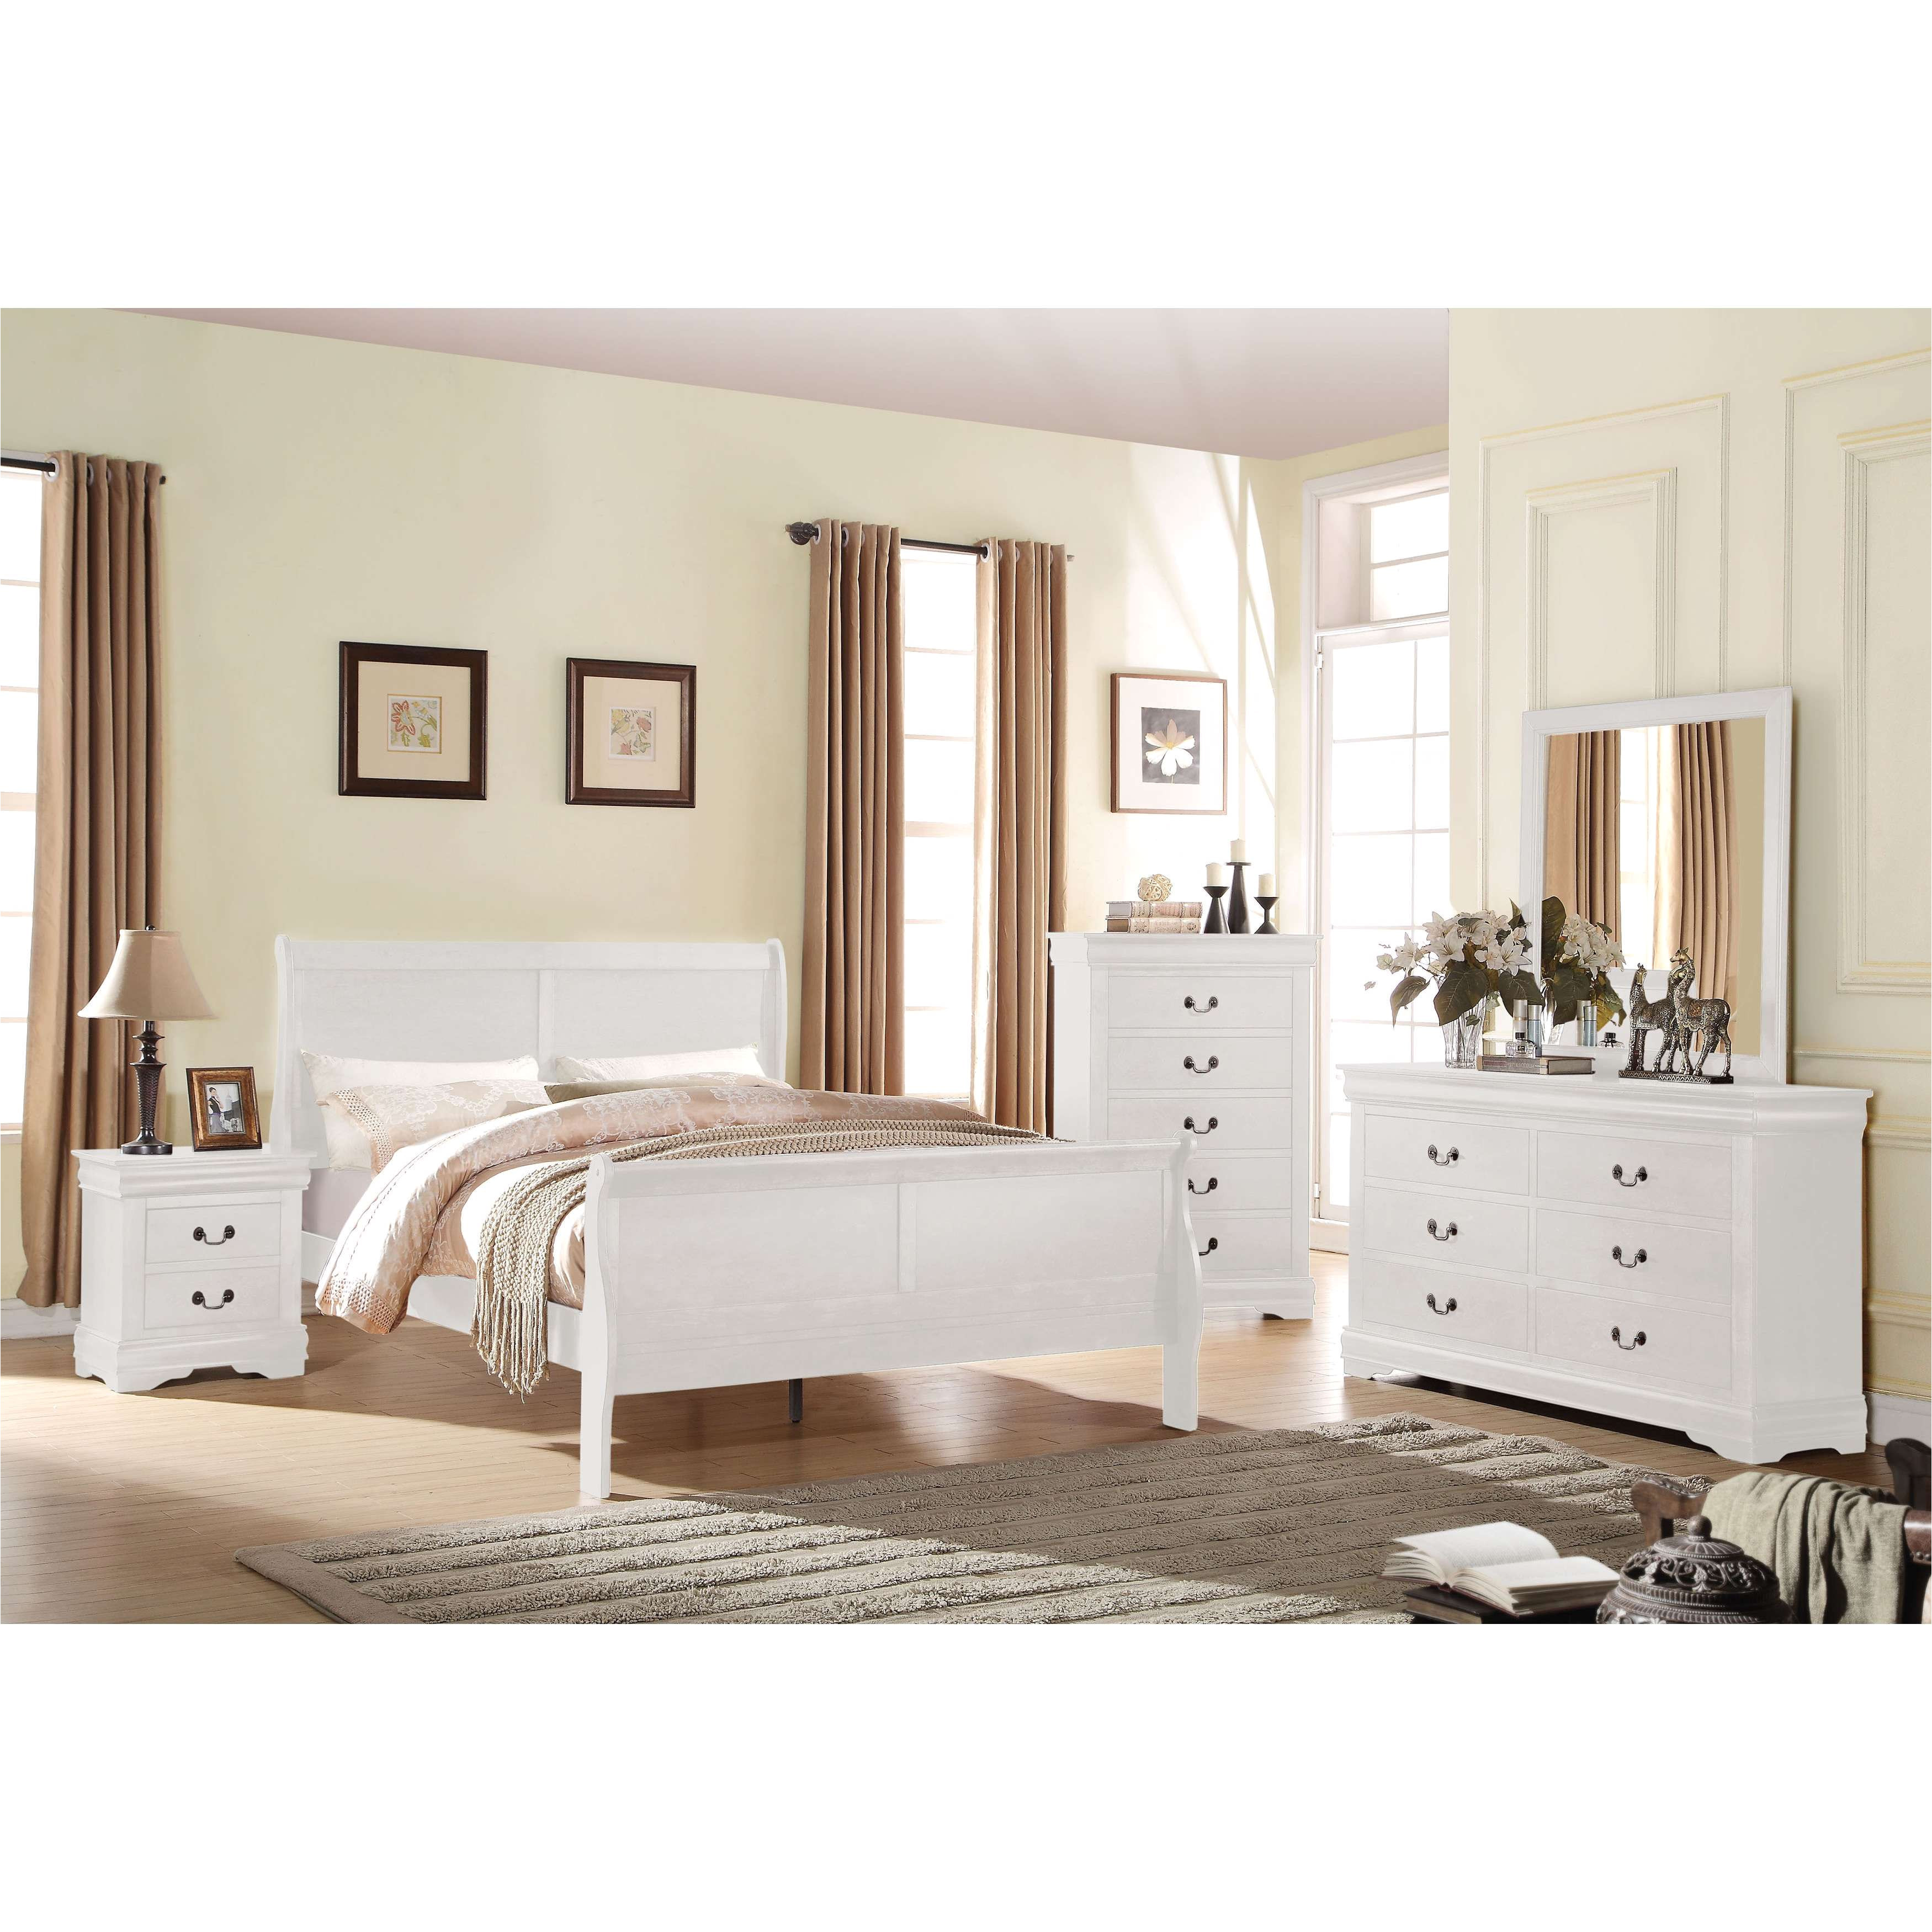 bob furniture bedroom sets american freight bedroom sets lovely acme furniture louis philippe